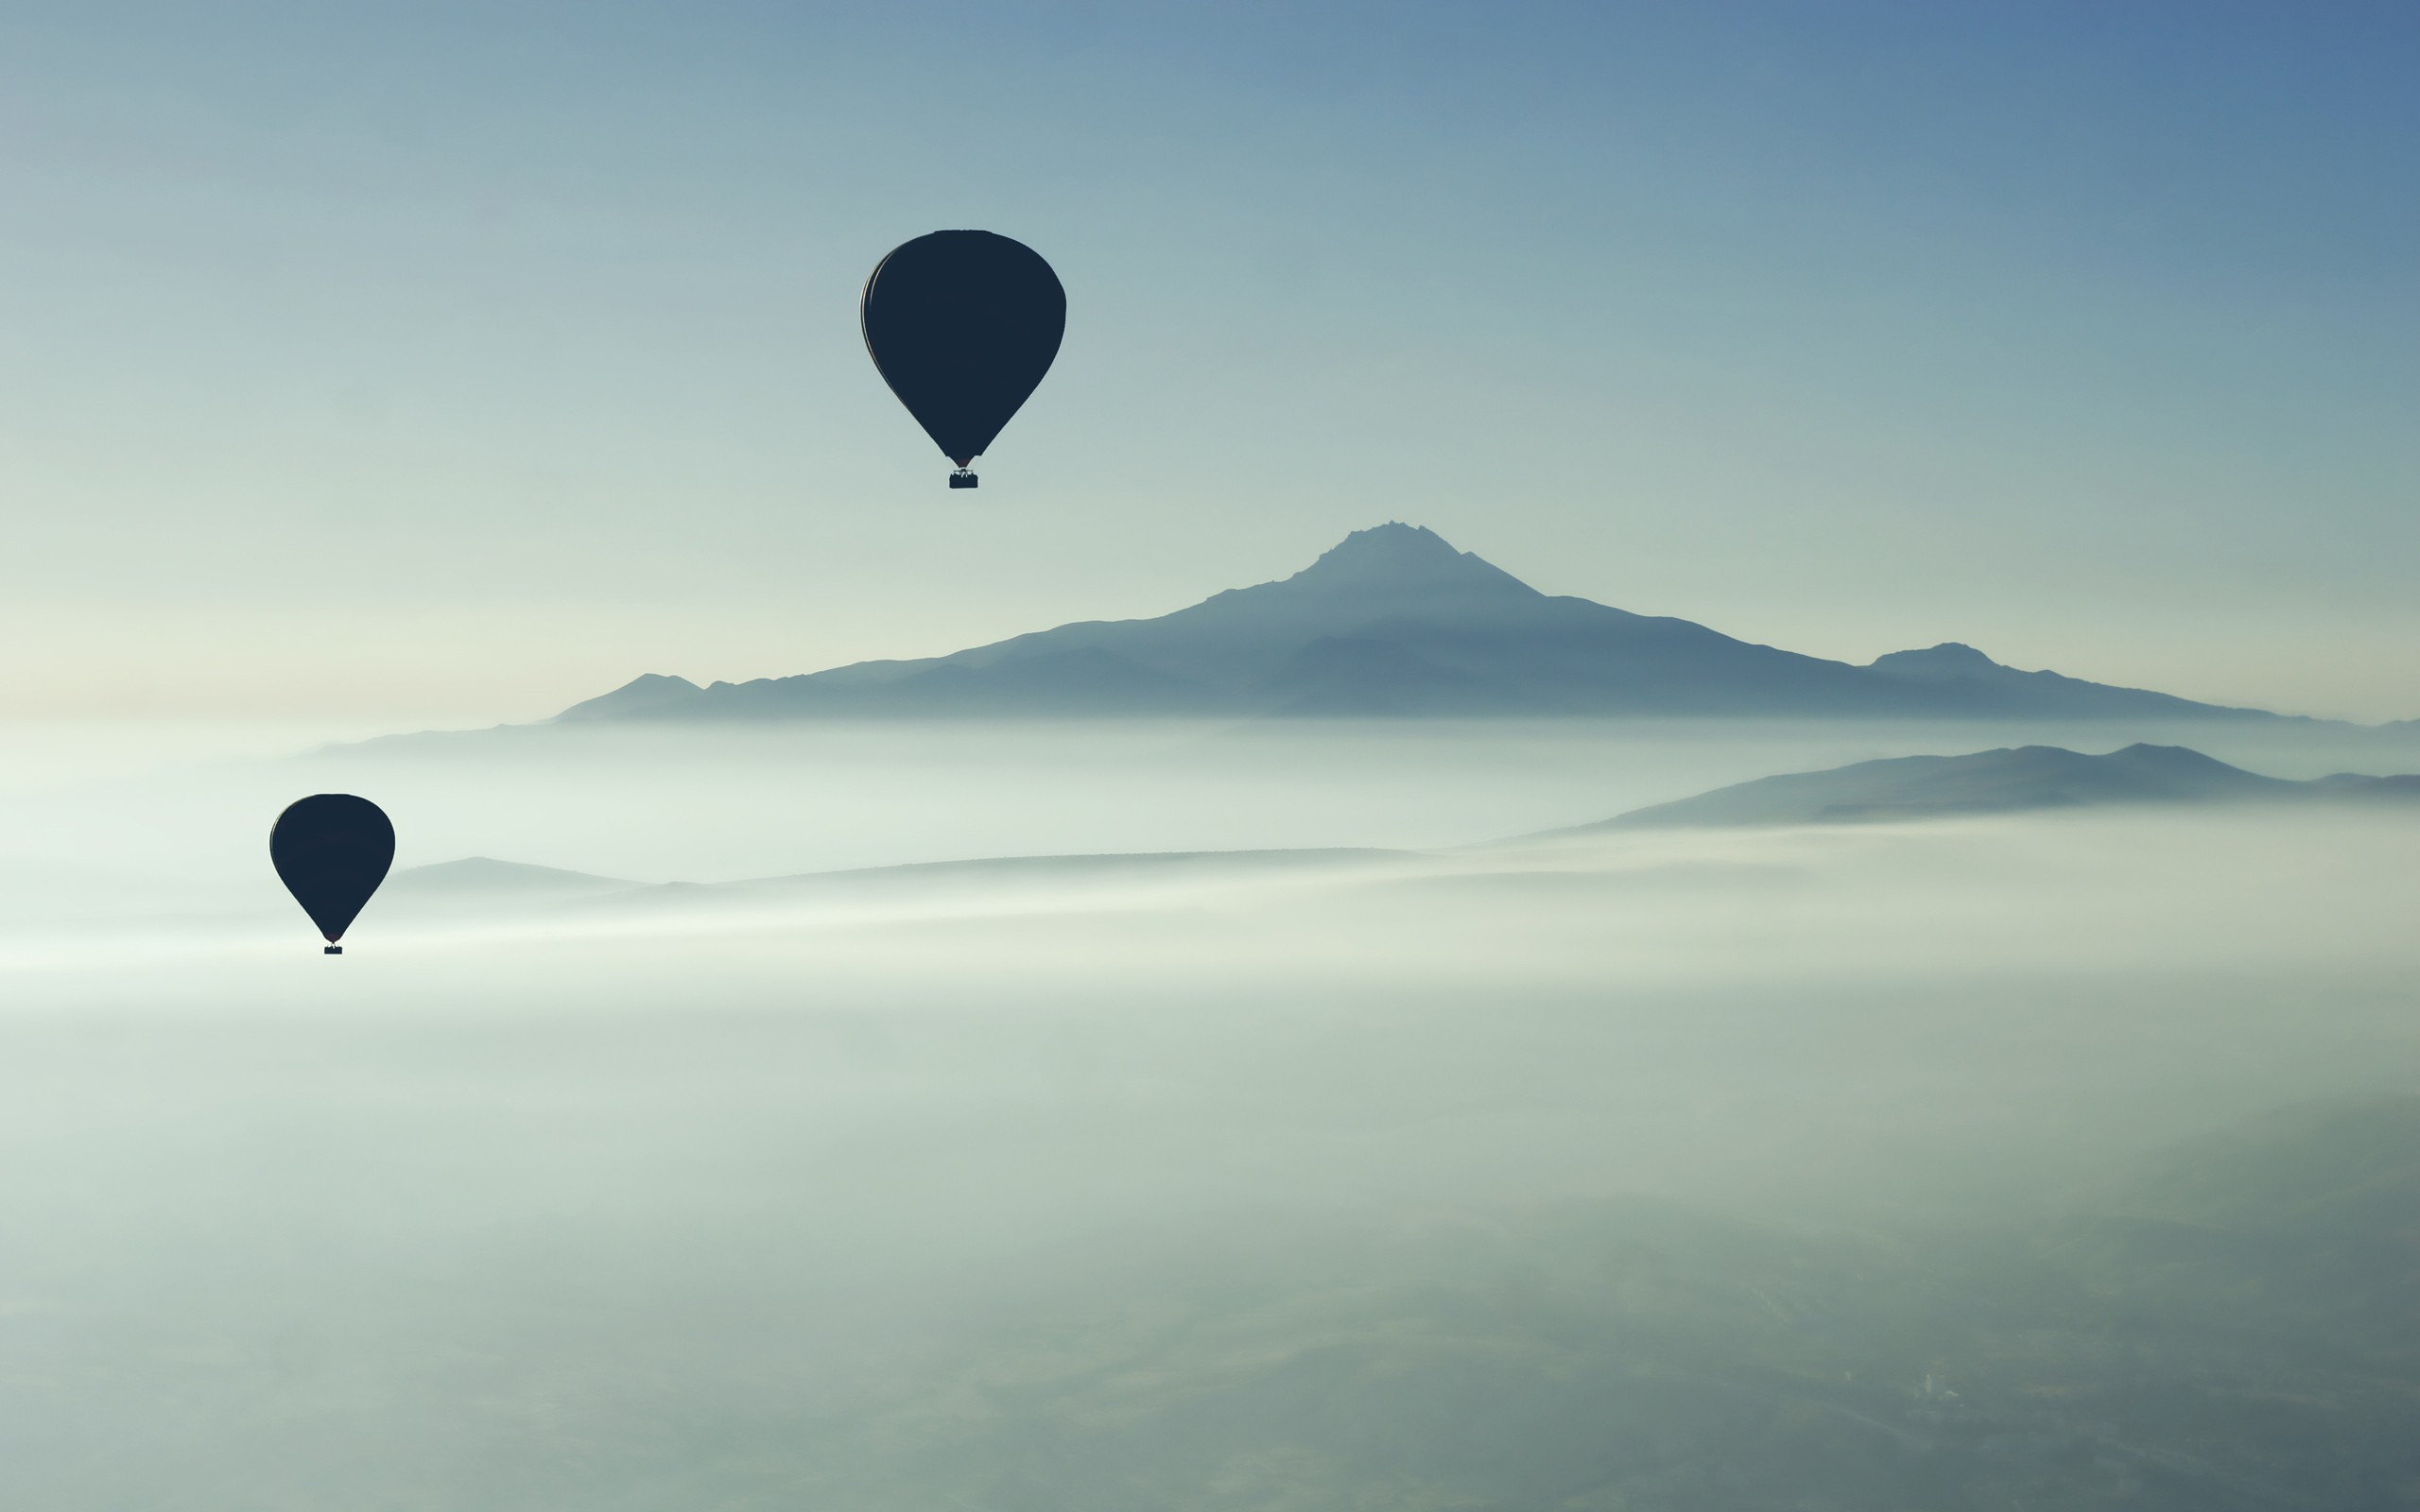 General 2560x1600 mountains hot air balloons nature landscape vehicle